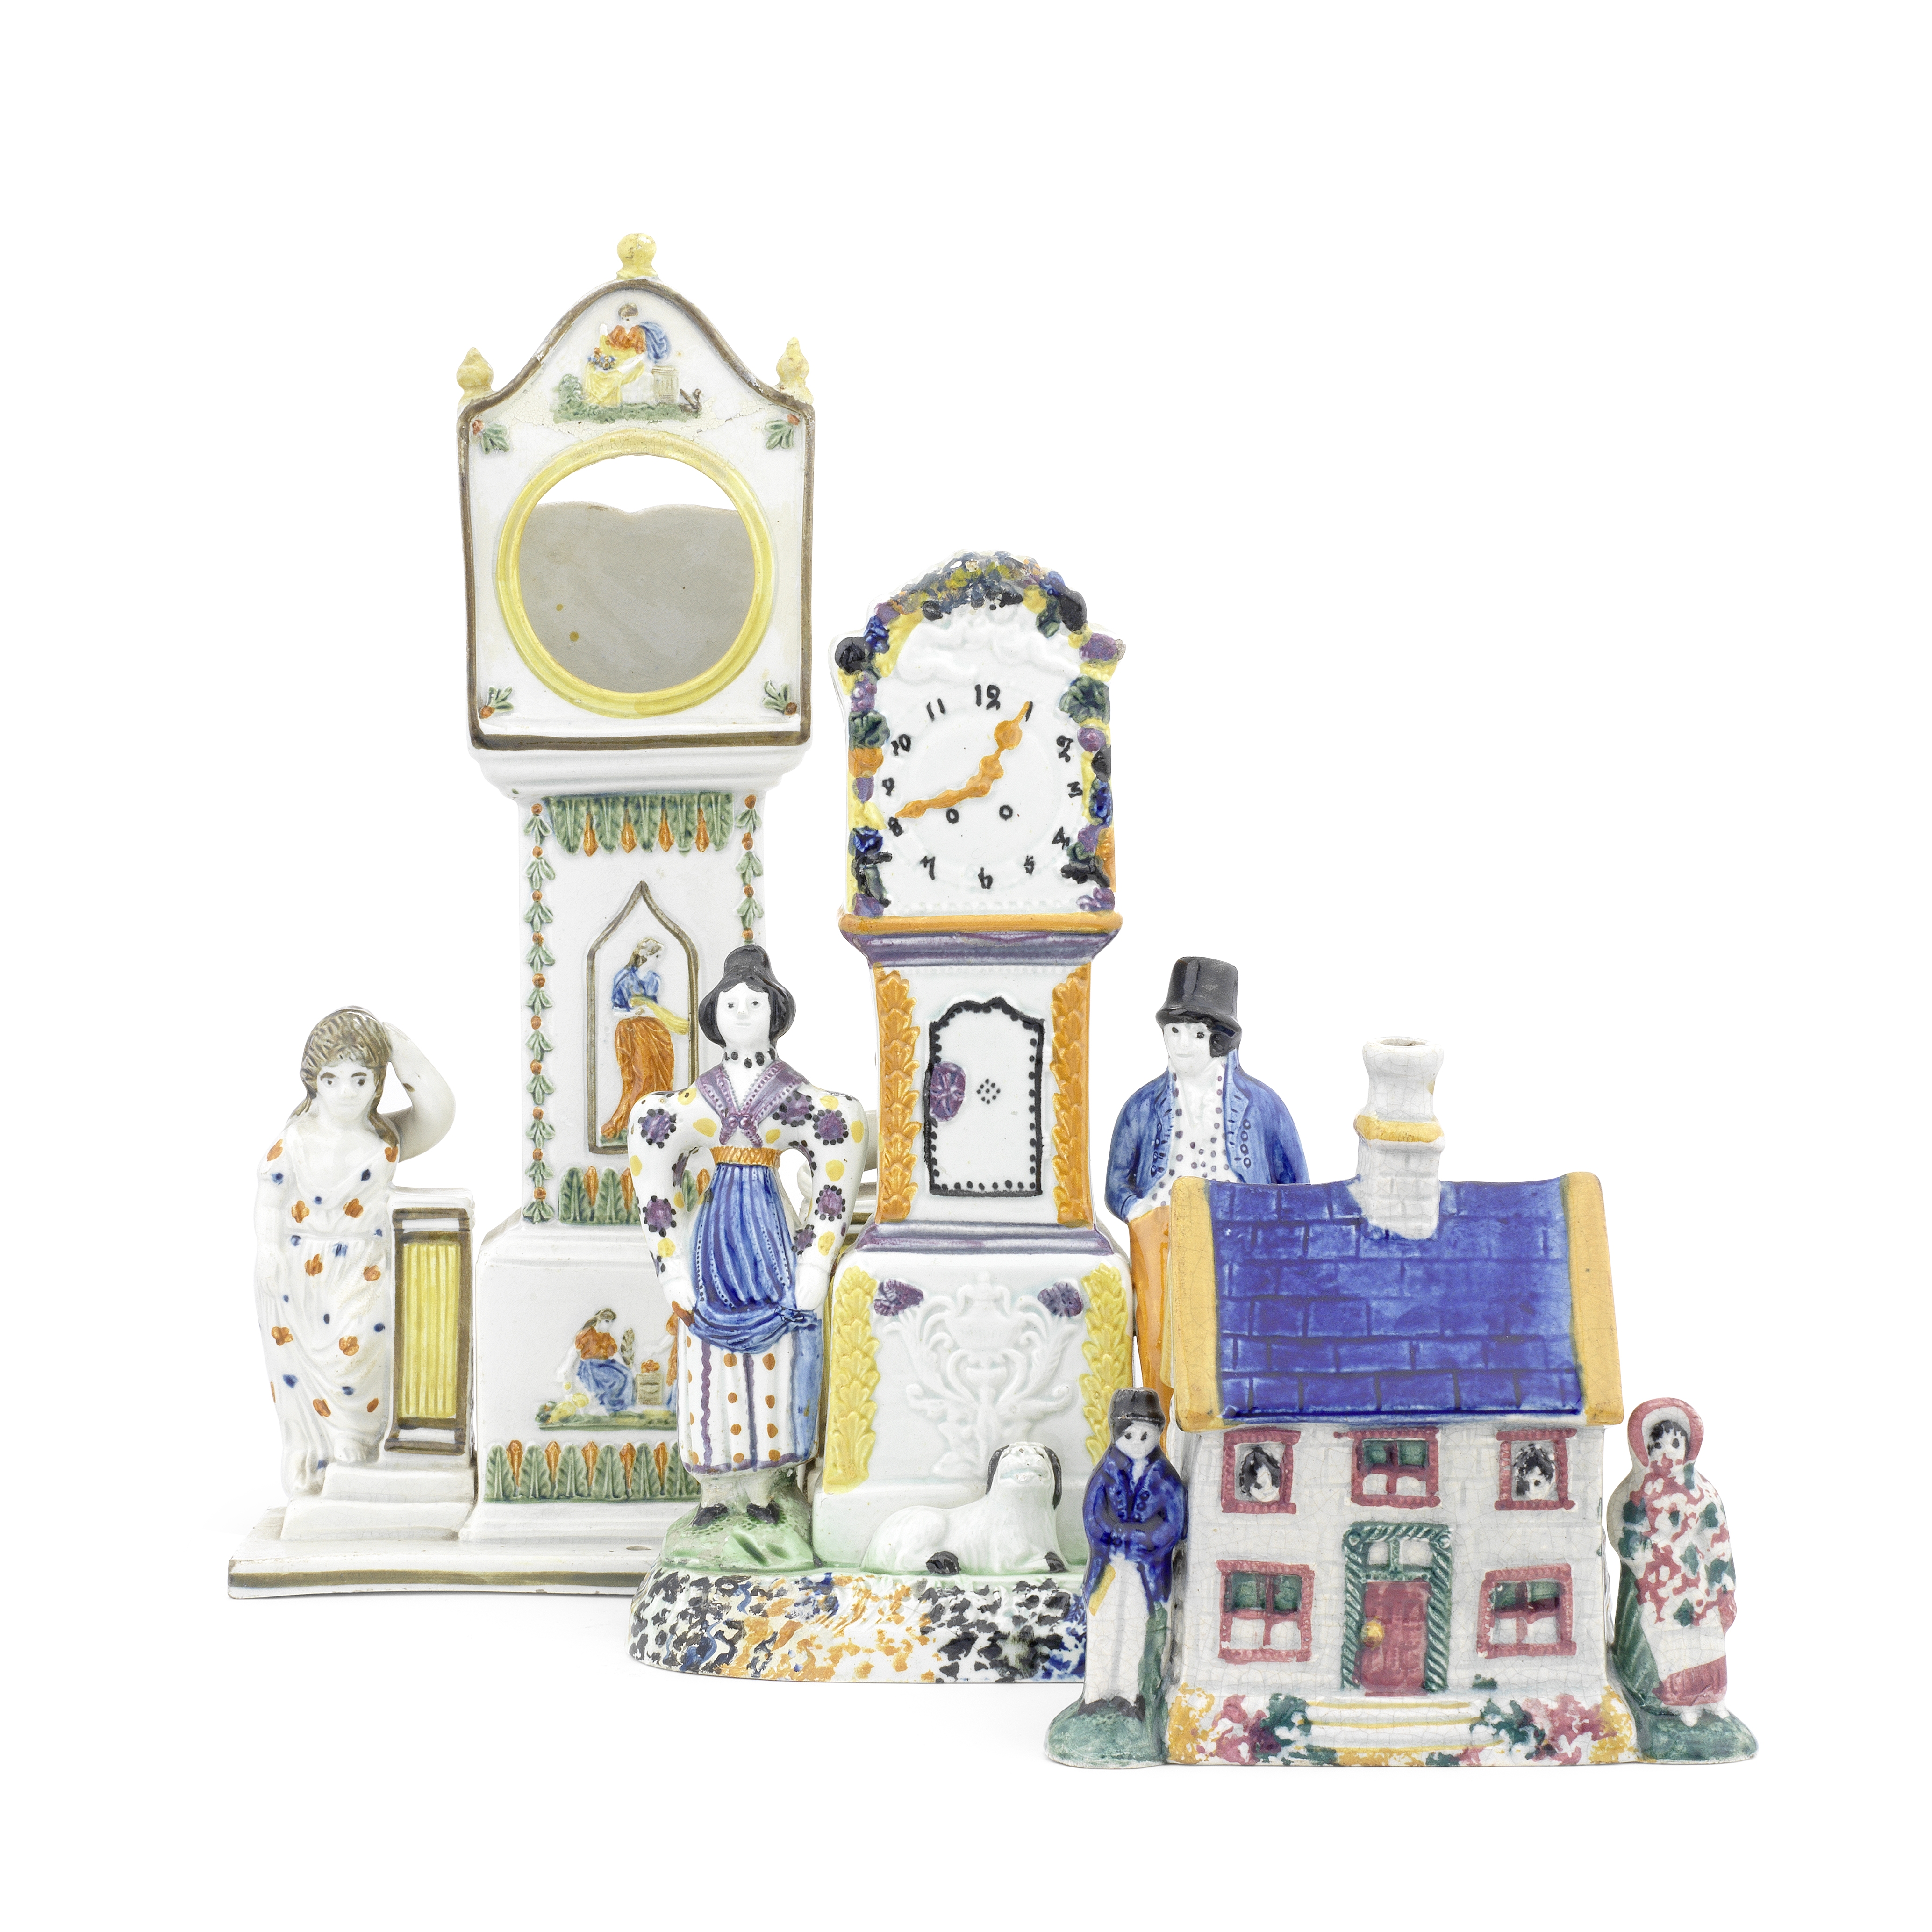 Two Yorkshire clock groups and a money box, circa 1815-30